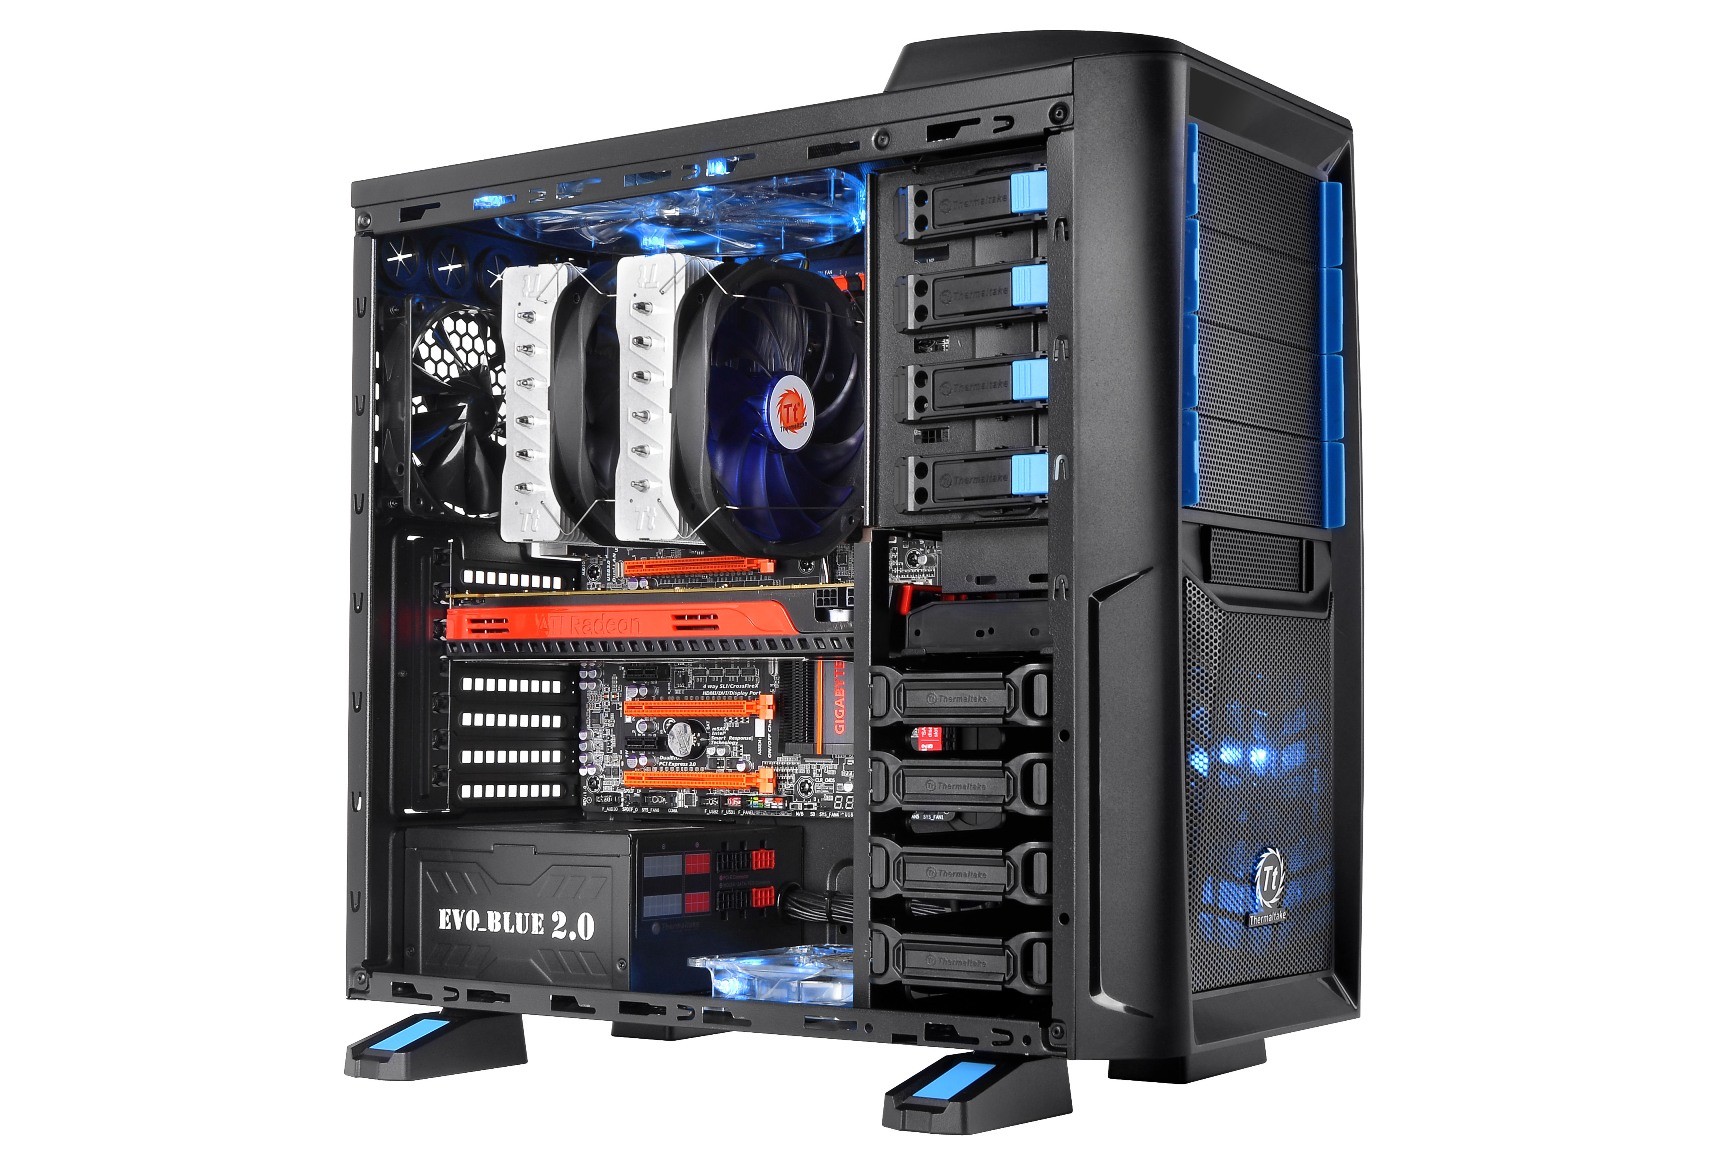 Media asset in full size related to 3dfxzone.it news item entitled as follows: Thermaltake annuncia il case gaming-oriented Chaser A41 | Image Name: news19016_Thermaltake-Chaser-A41_case_2.jpg